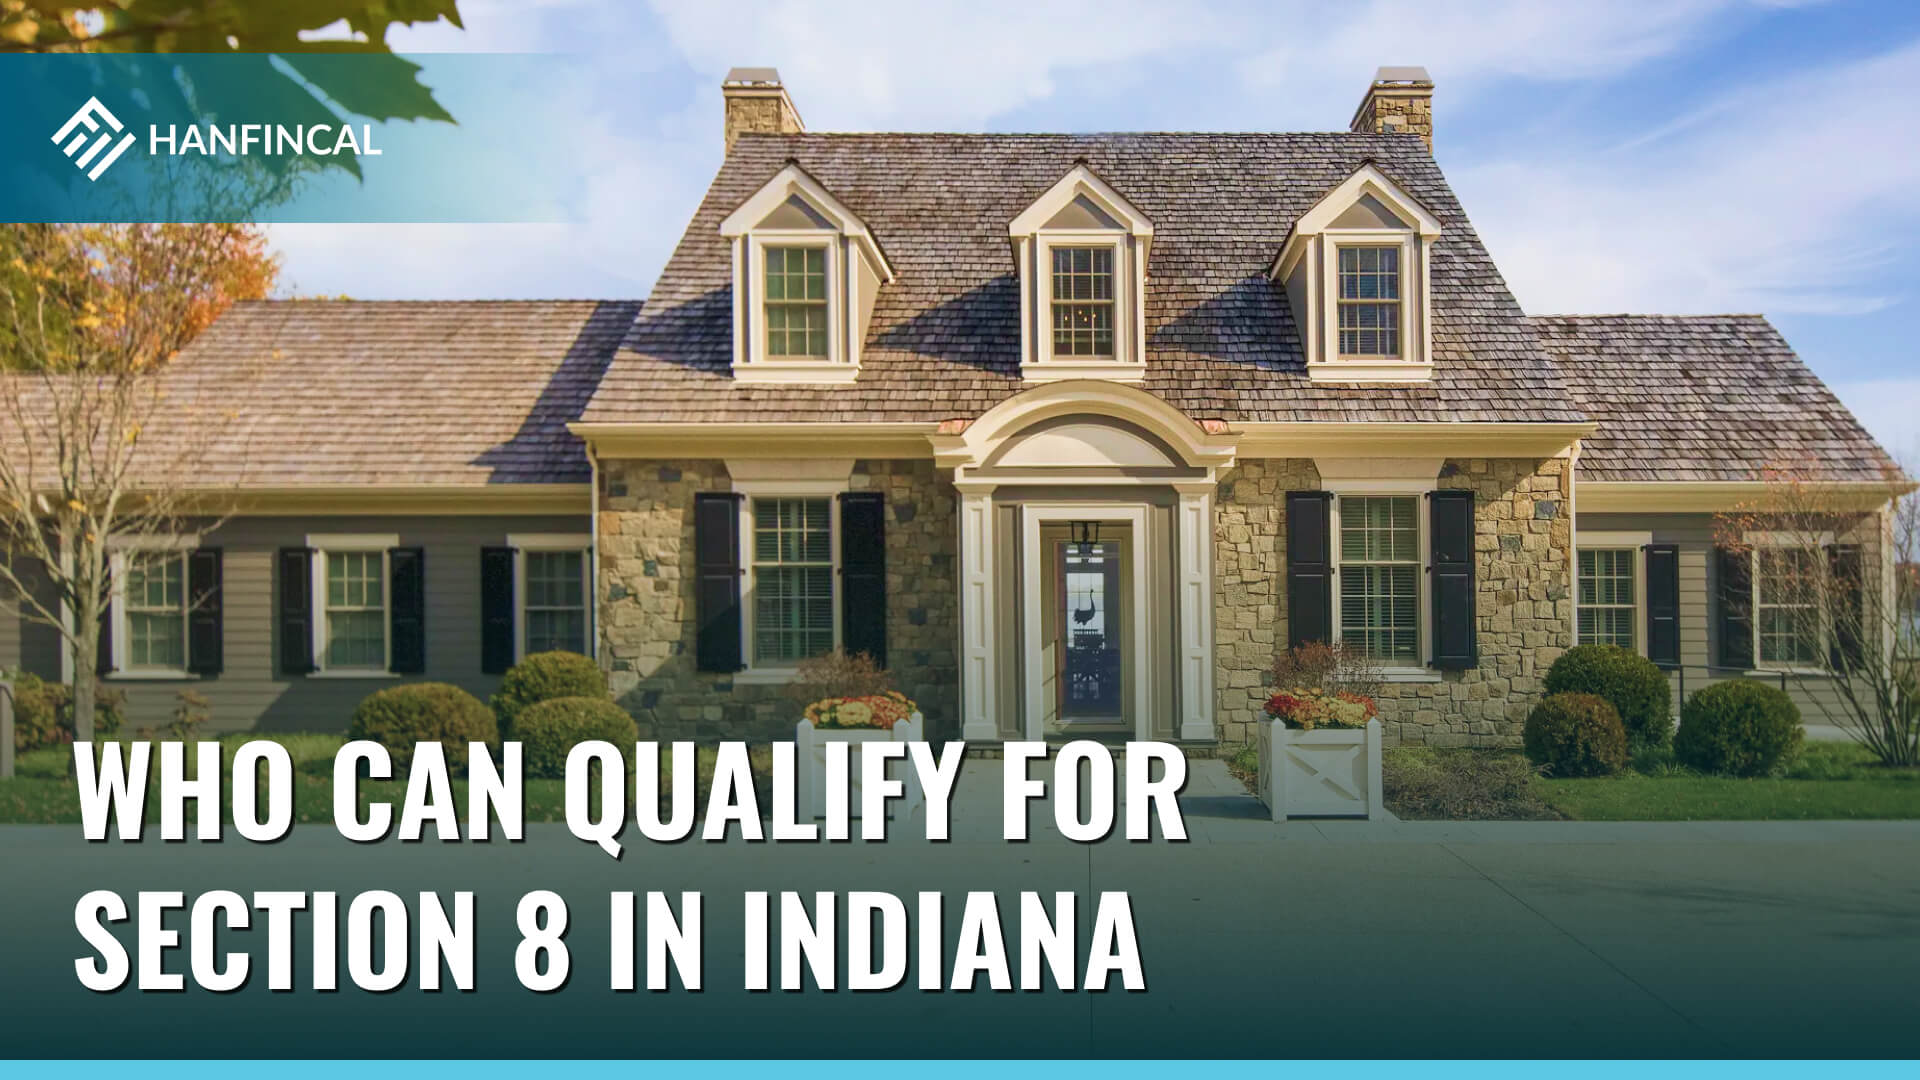 Who can qualify for Section 8 in Indiana (IN)?